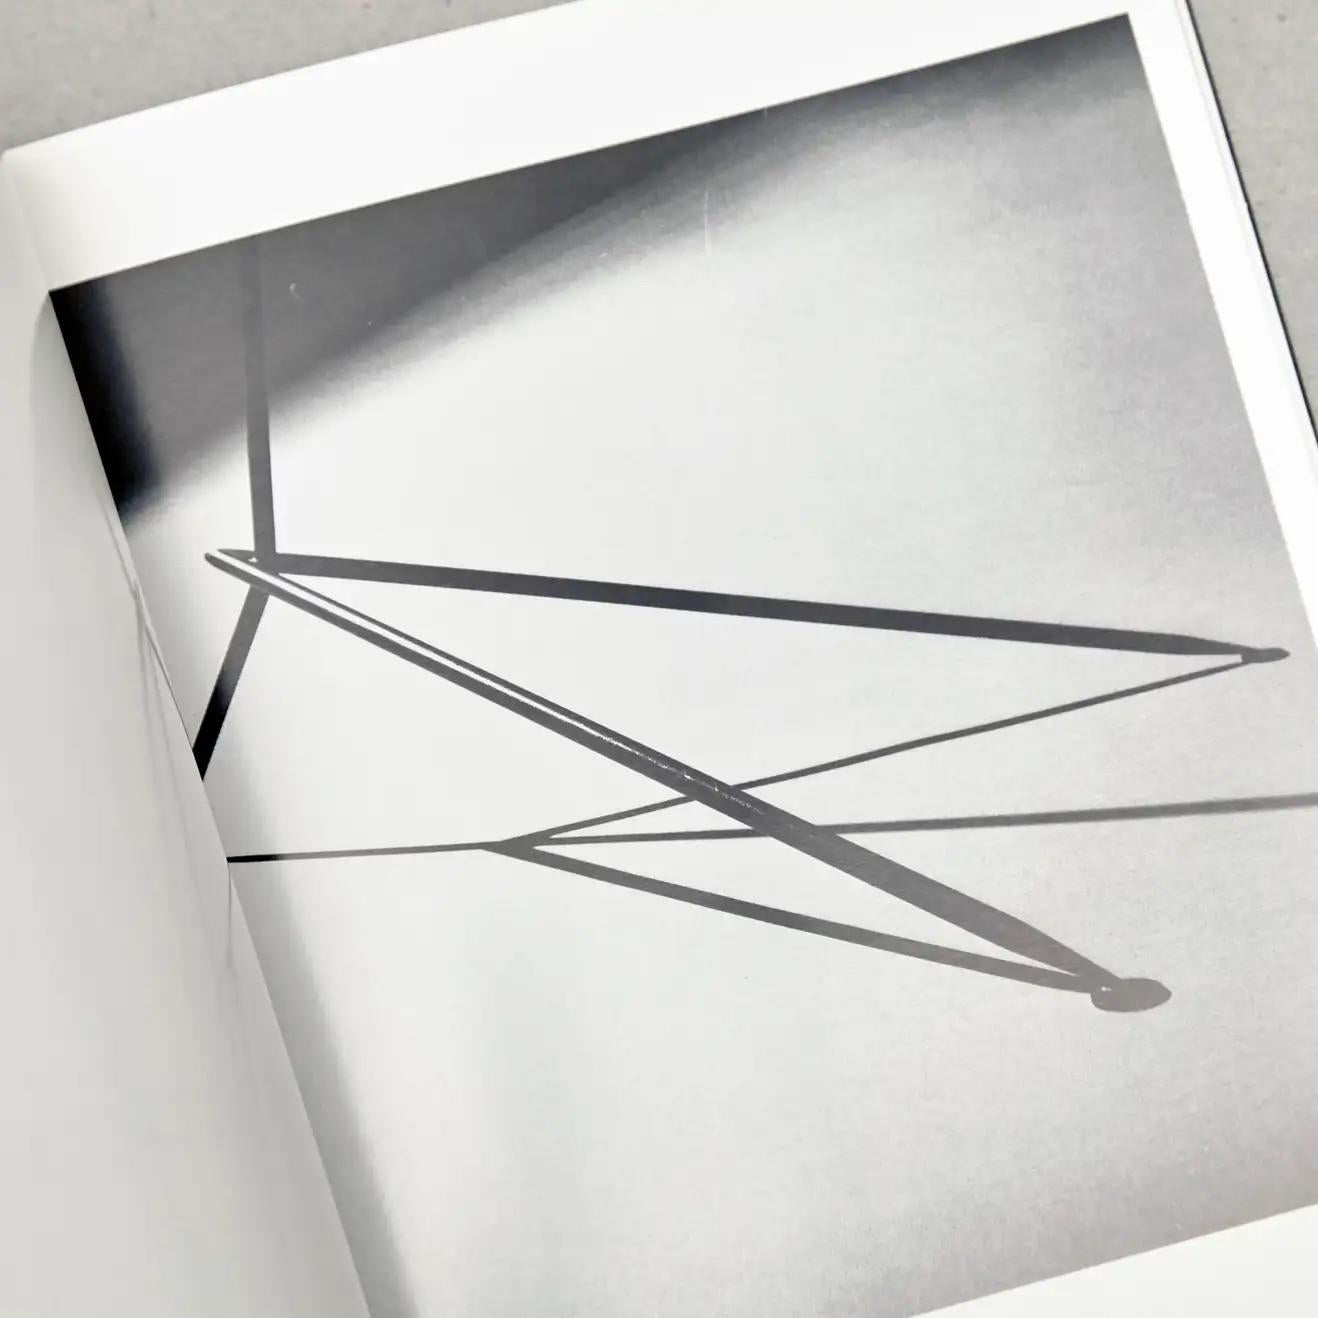 Book of Luminiares from Serge Mouille edited by Carla Sozzani Editore, 1993

After having worked a few years in the workshop of Gabriel Lacroix, he opened his own workshop in 1945 with the intention of creating silverware utensils.

In 1953 he